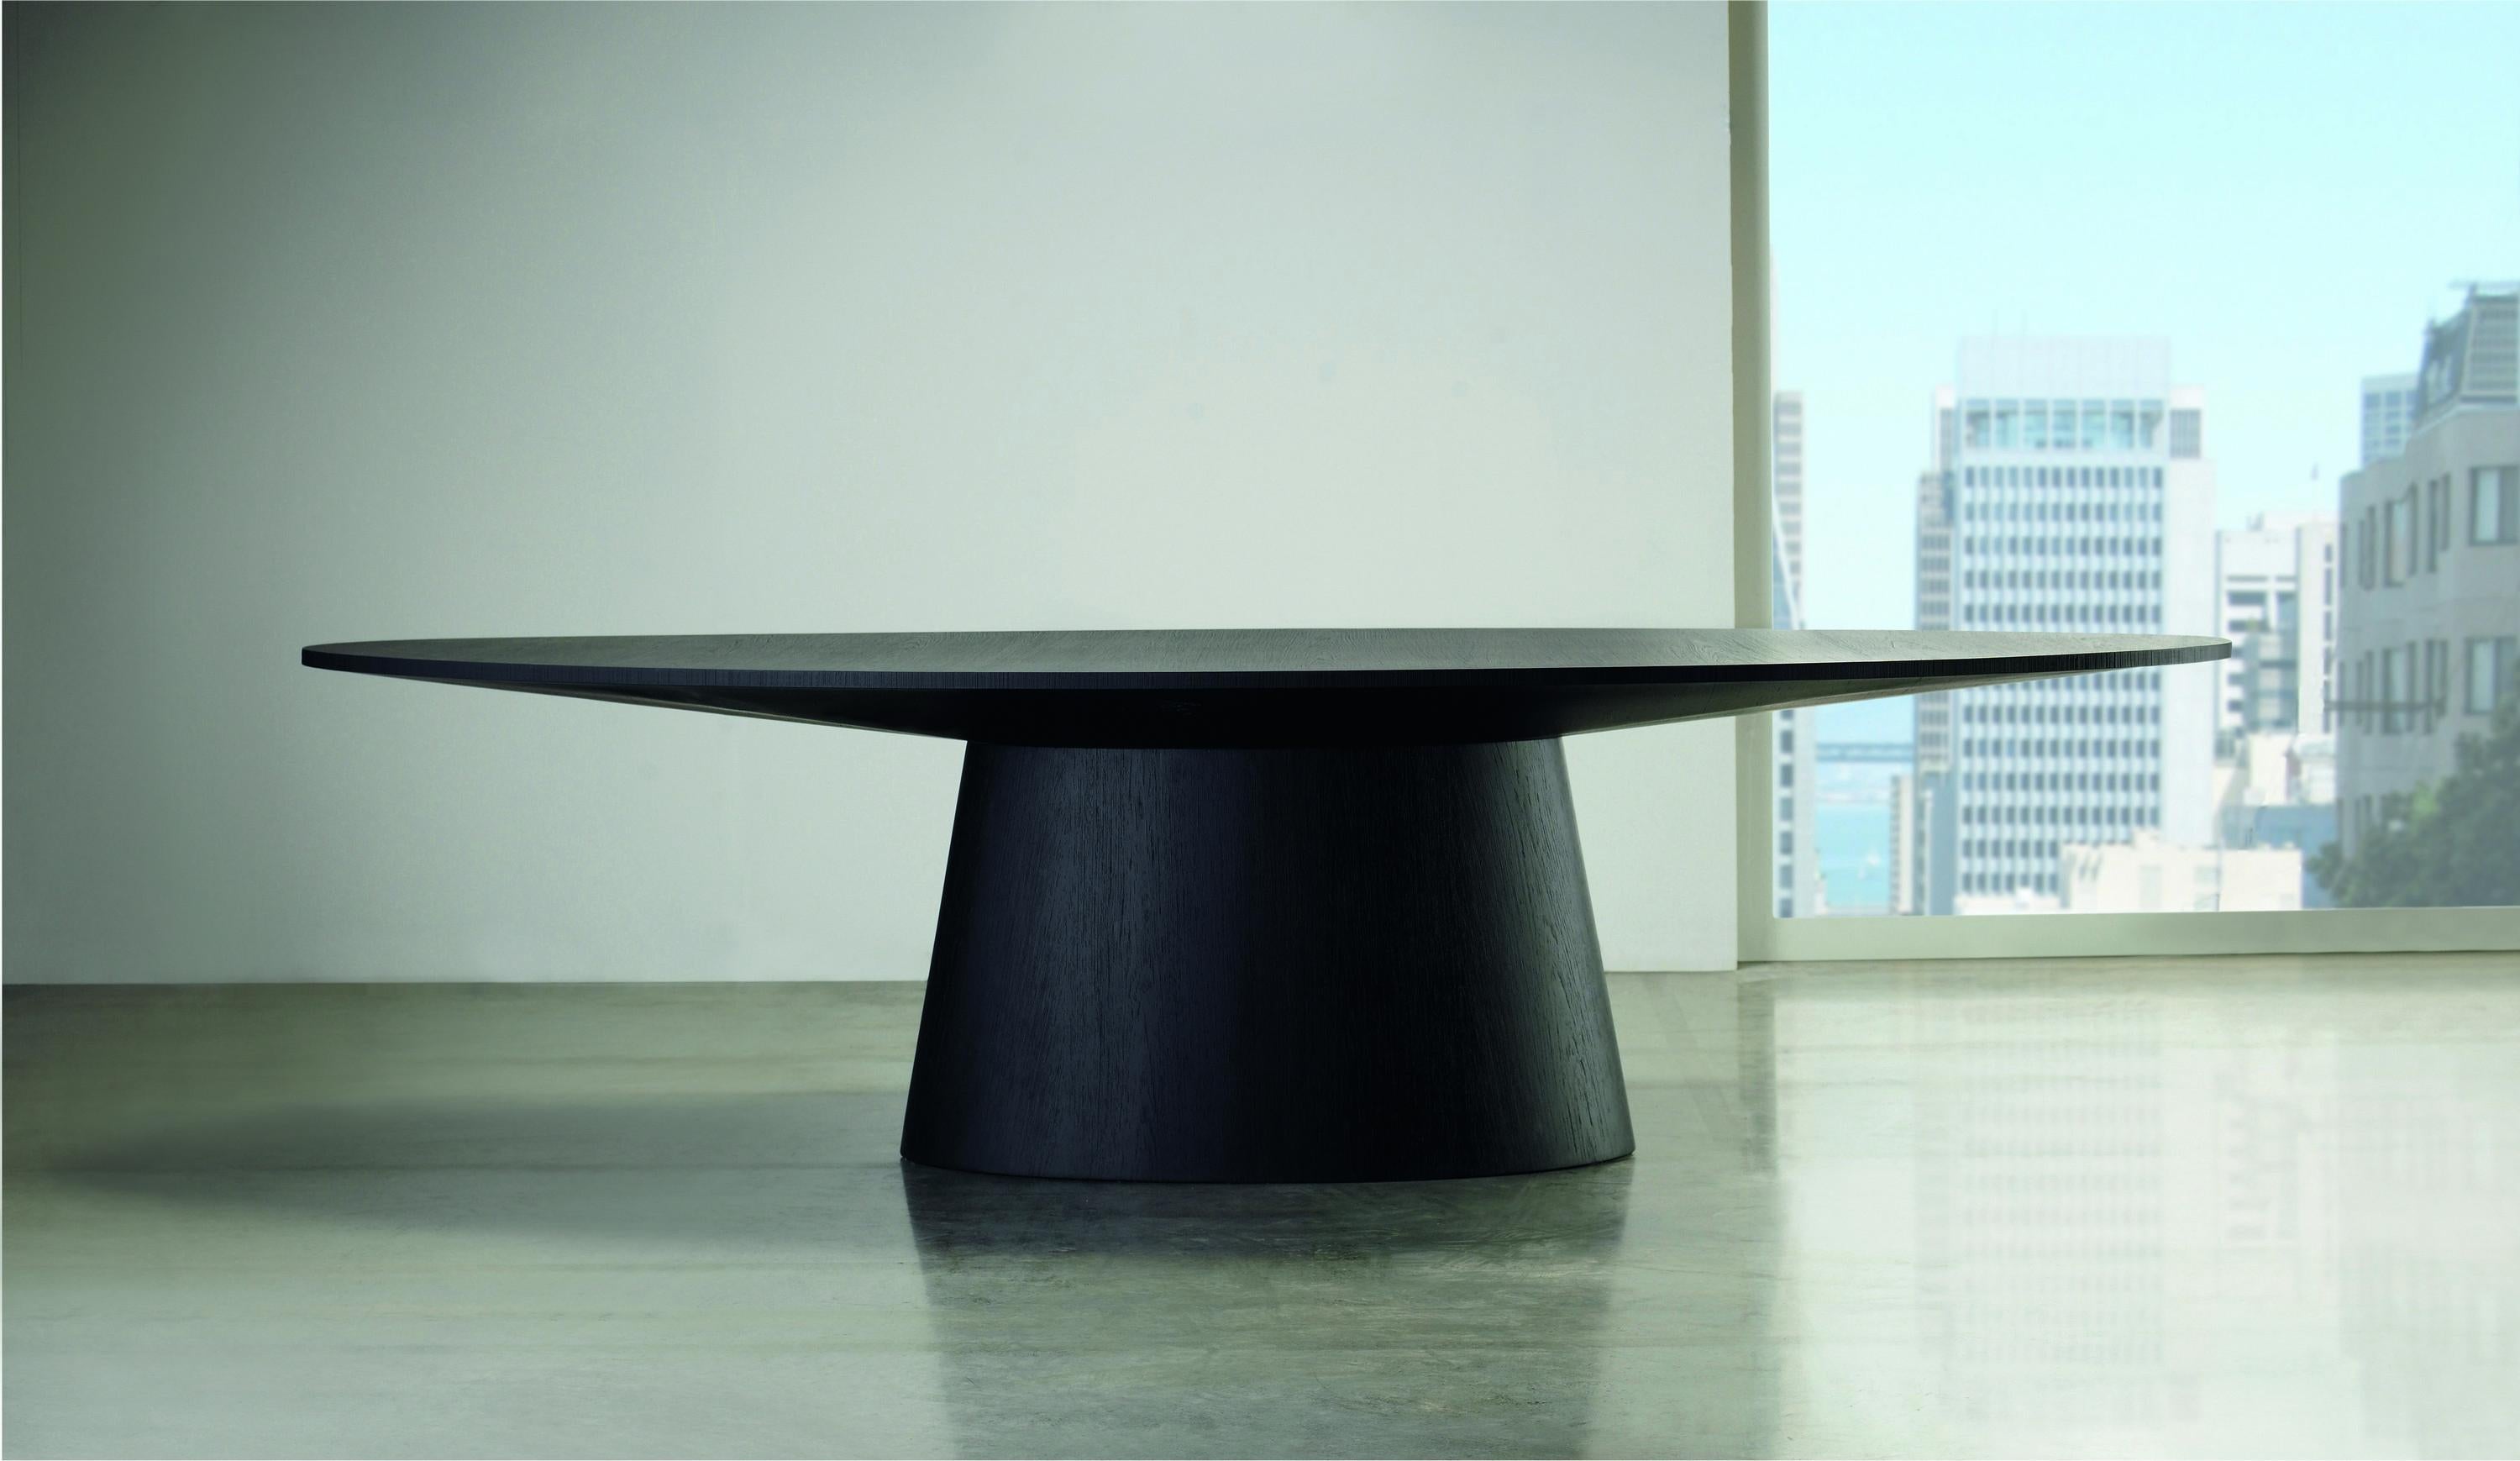 Eclipse Dining Table by Doimo Brasil
Dimensions: W 200 x D 110 x H 75 cm 
Materials: Top: Veneer.

Also available in W 220 x D 110, W 240 x D 110, W 260 x D 110, W 290 x D 110, W 350 x D110. Please contact us.

With the intention of providing good